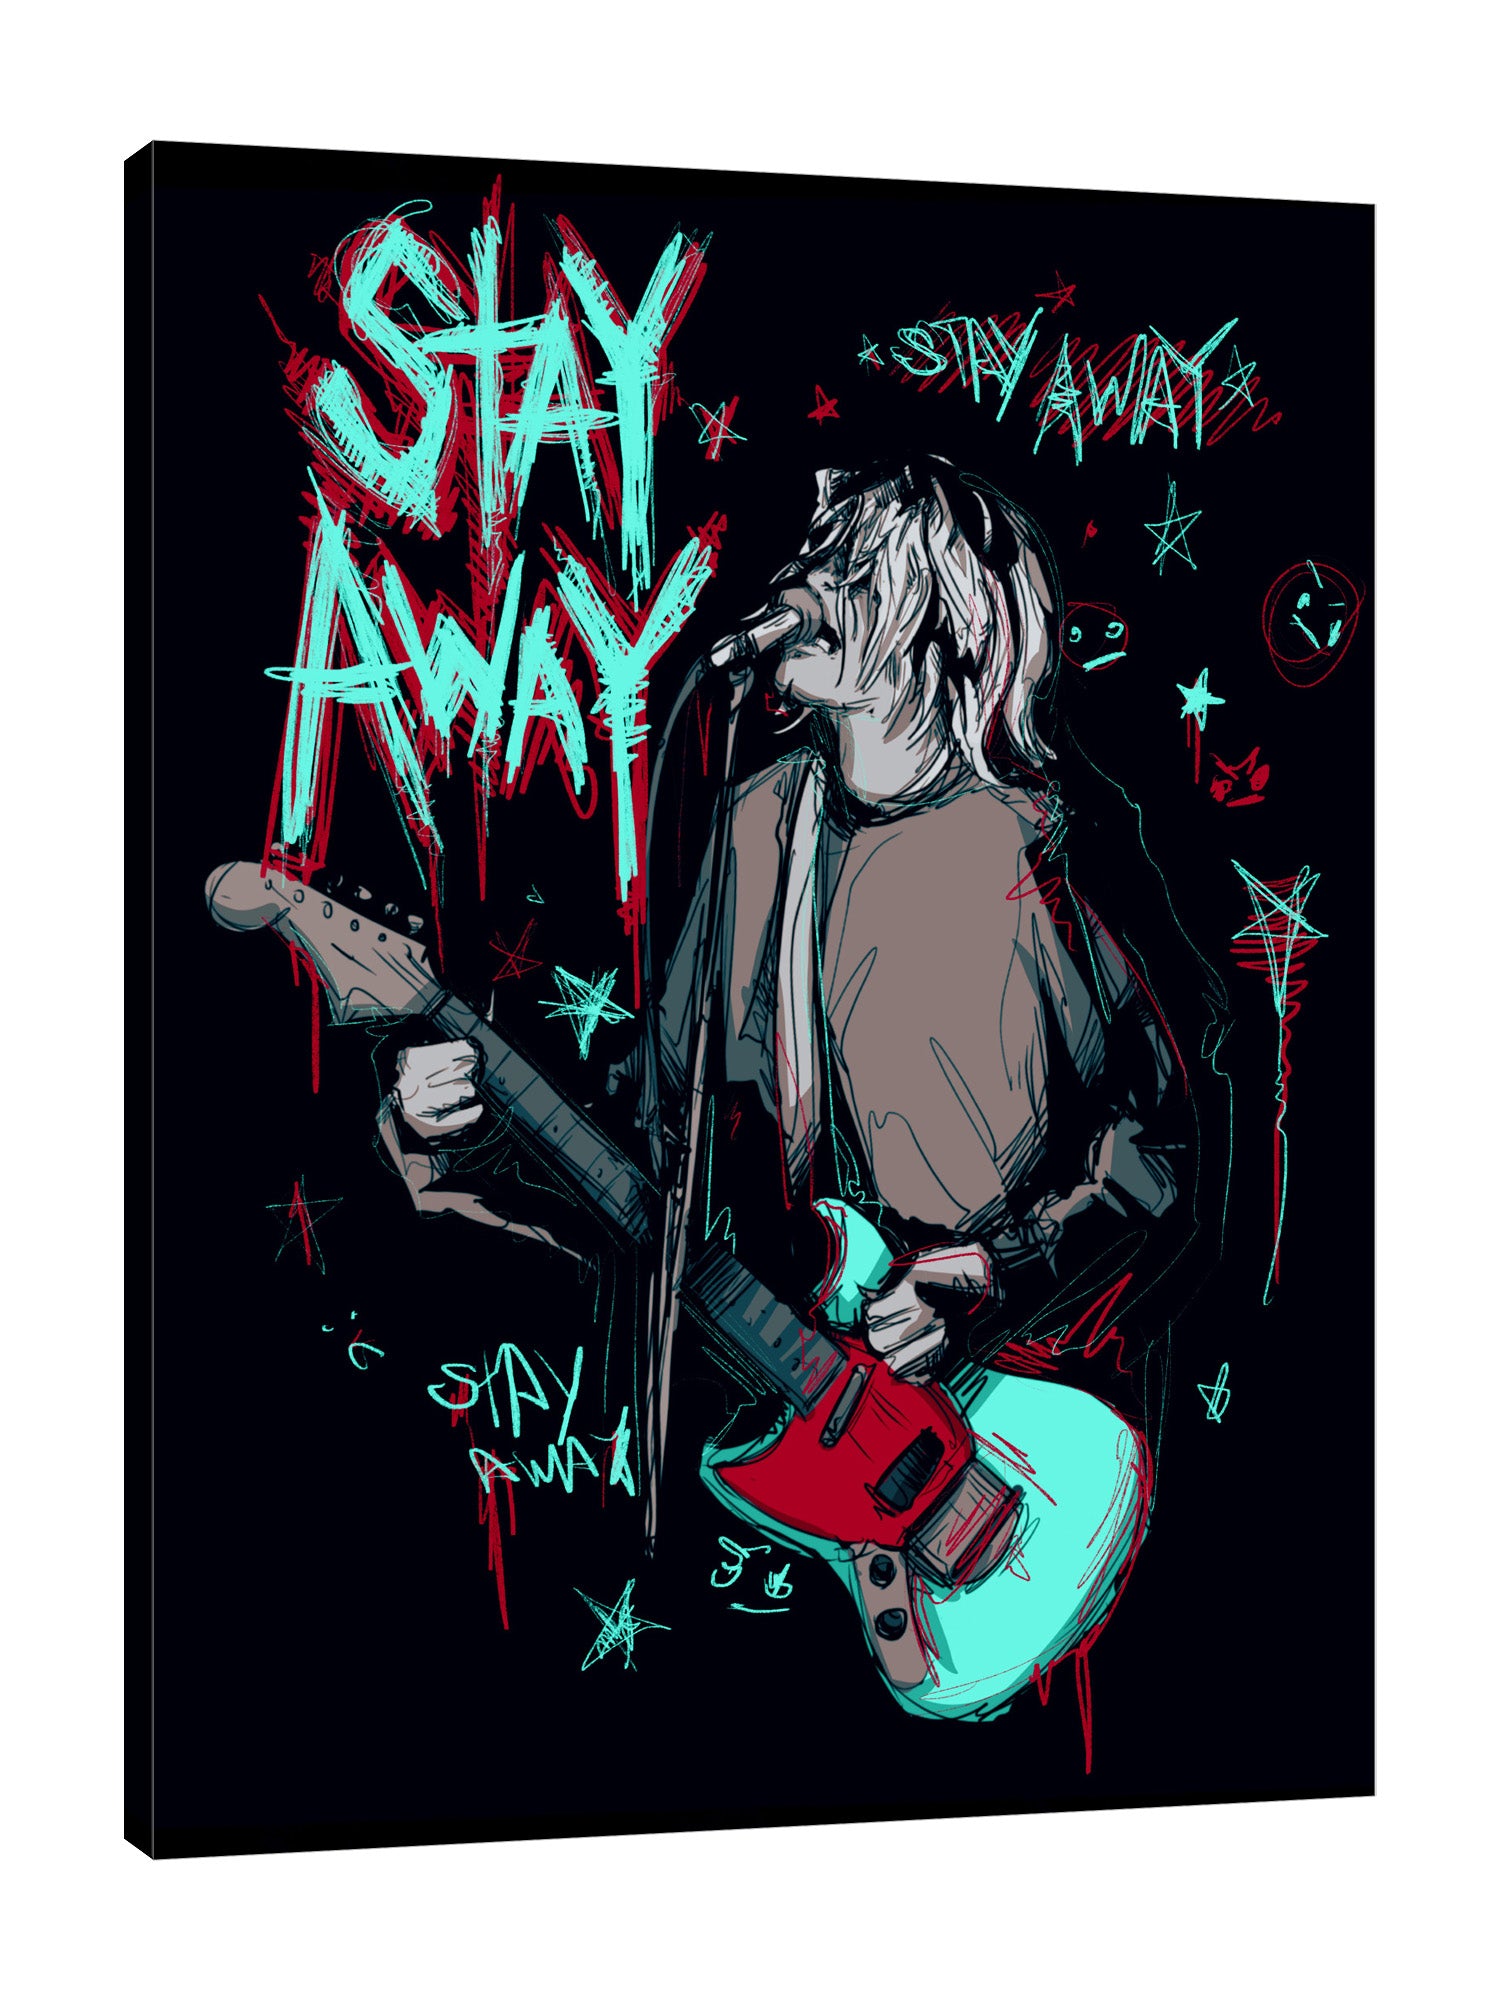 Ludwig-Van-Bacon,Vertical,3X4,Modern & Contemporary,People,Entertainment,entertainer,singer,musician,guitar,guitars,scribble,scribbles,words,stay away,star,stars,singing,mic,music,Forest Green,Red,Black,Charcoal Gray,Purple,Blue